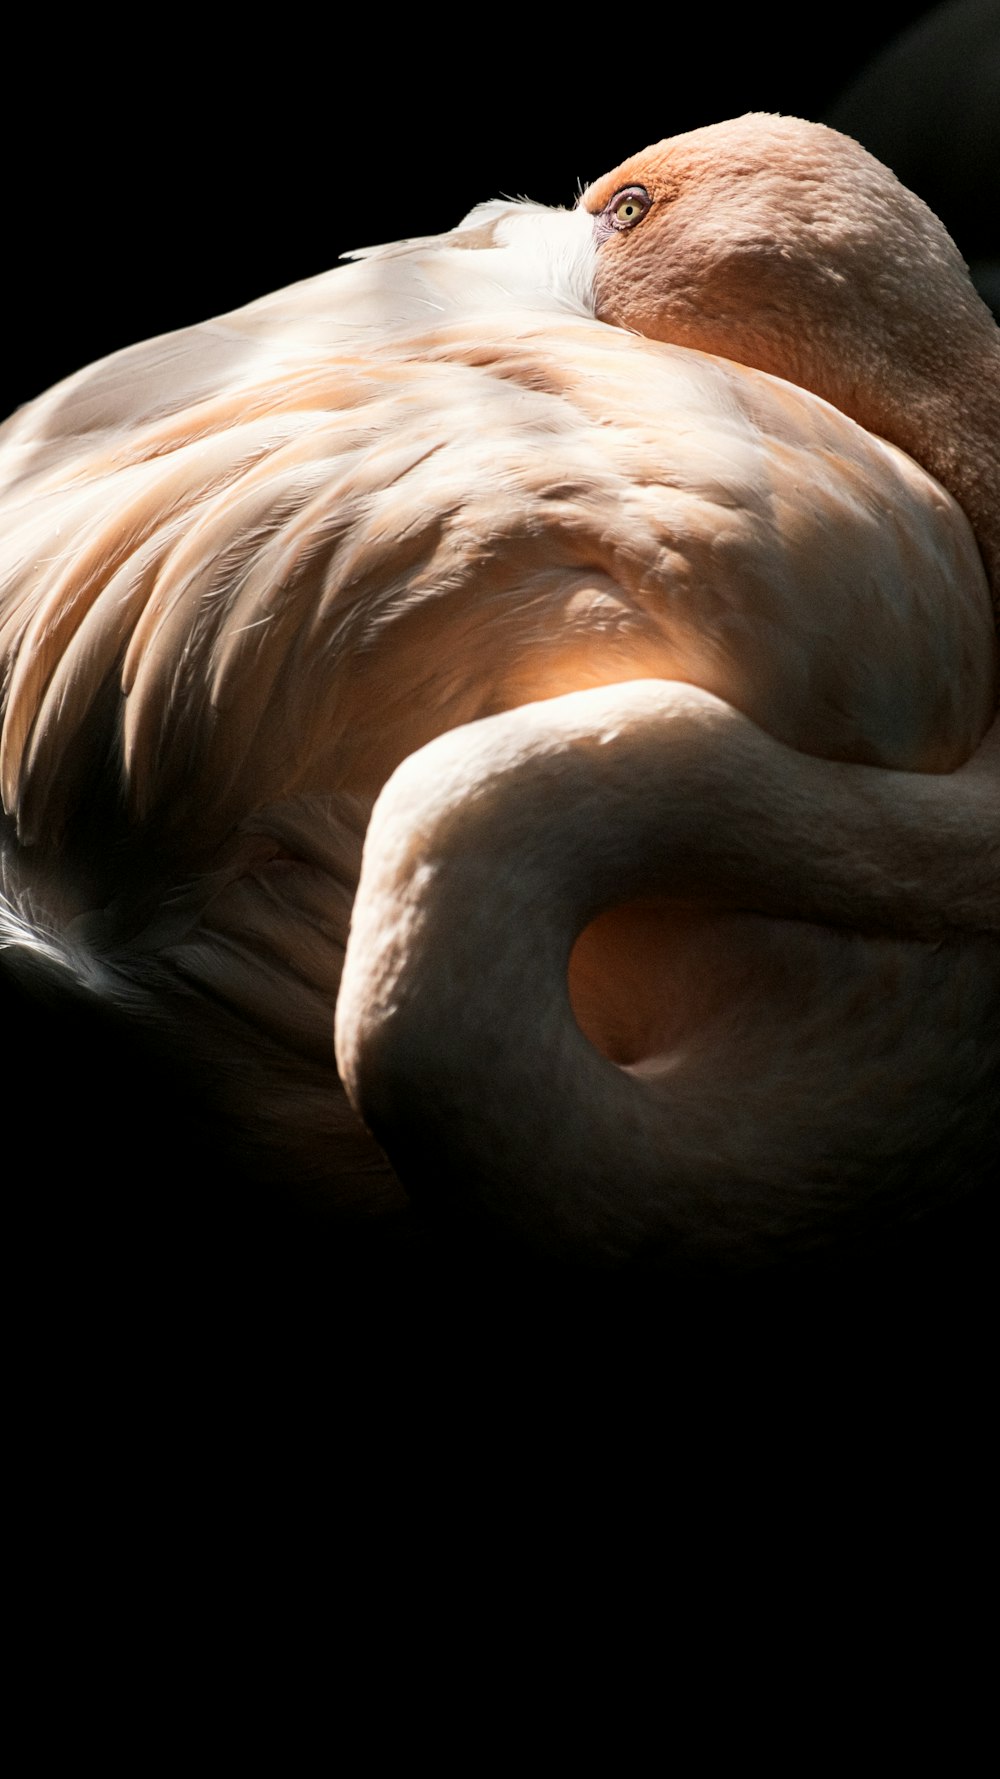 a close up of a bird on a black background